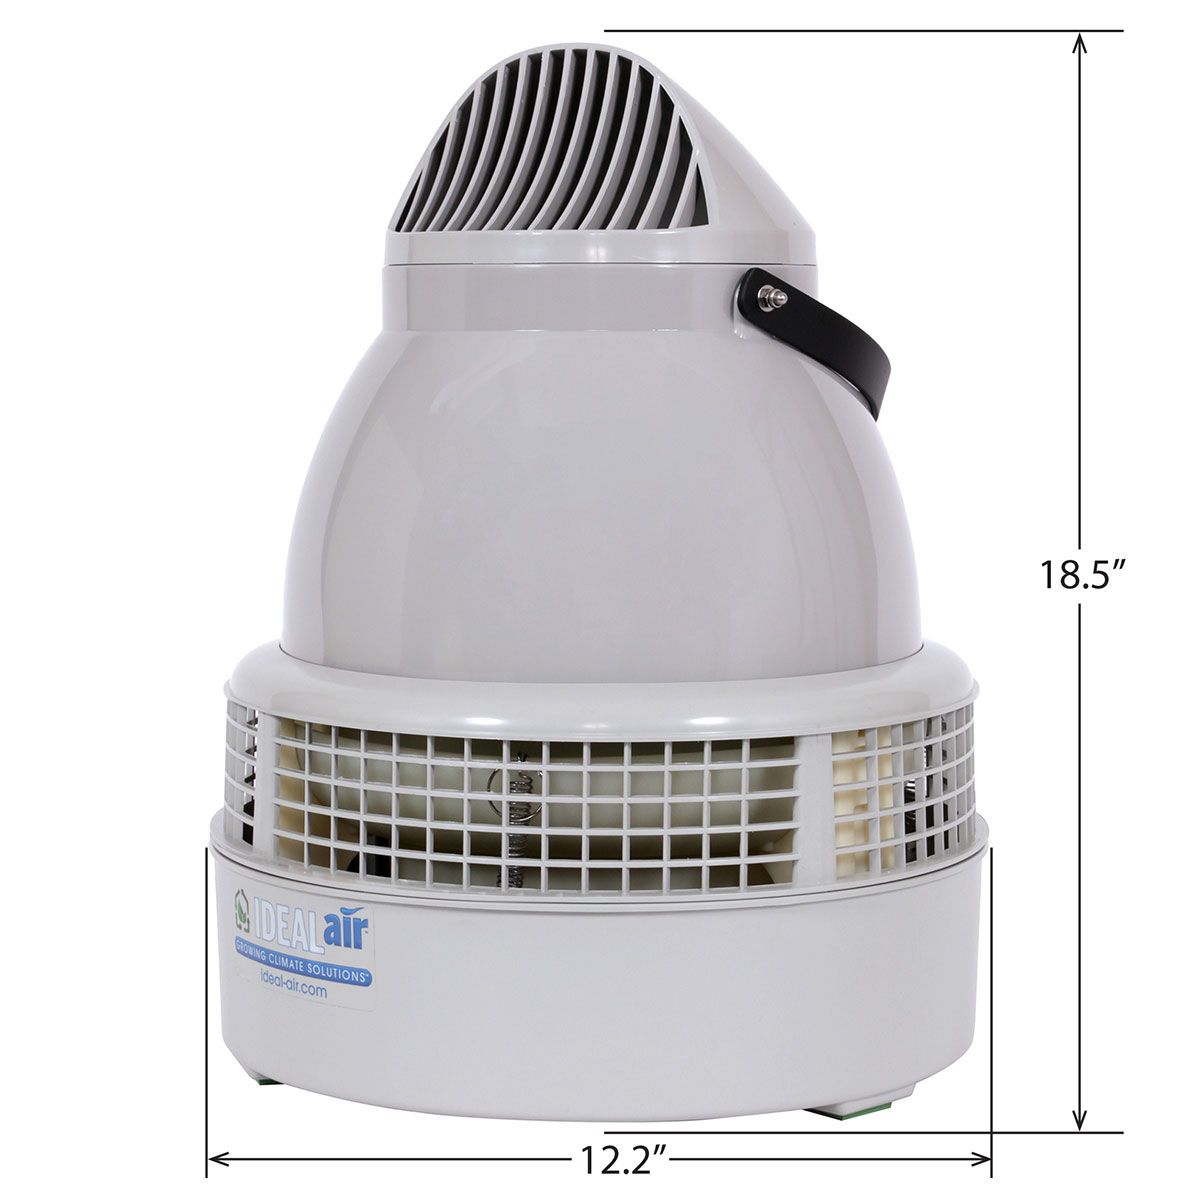 Product Secondary Image:Ideal-Air Commercial Grade Humidifier 75 Pint